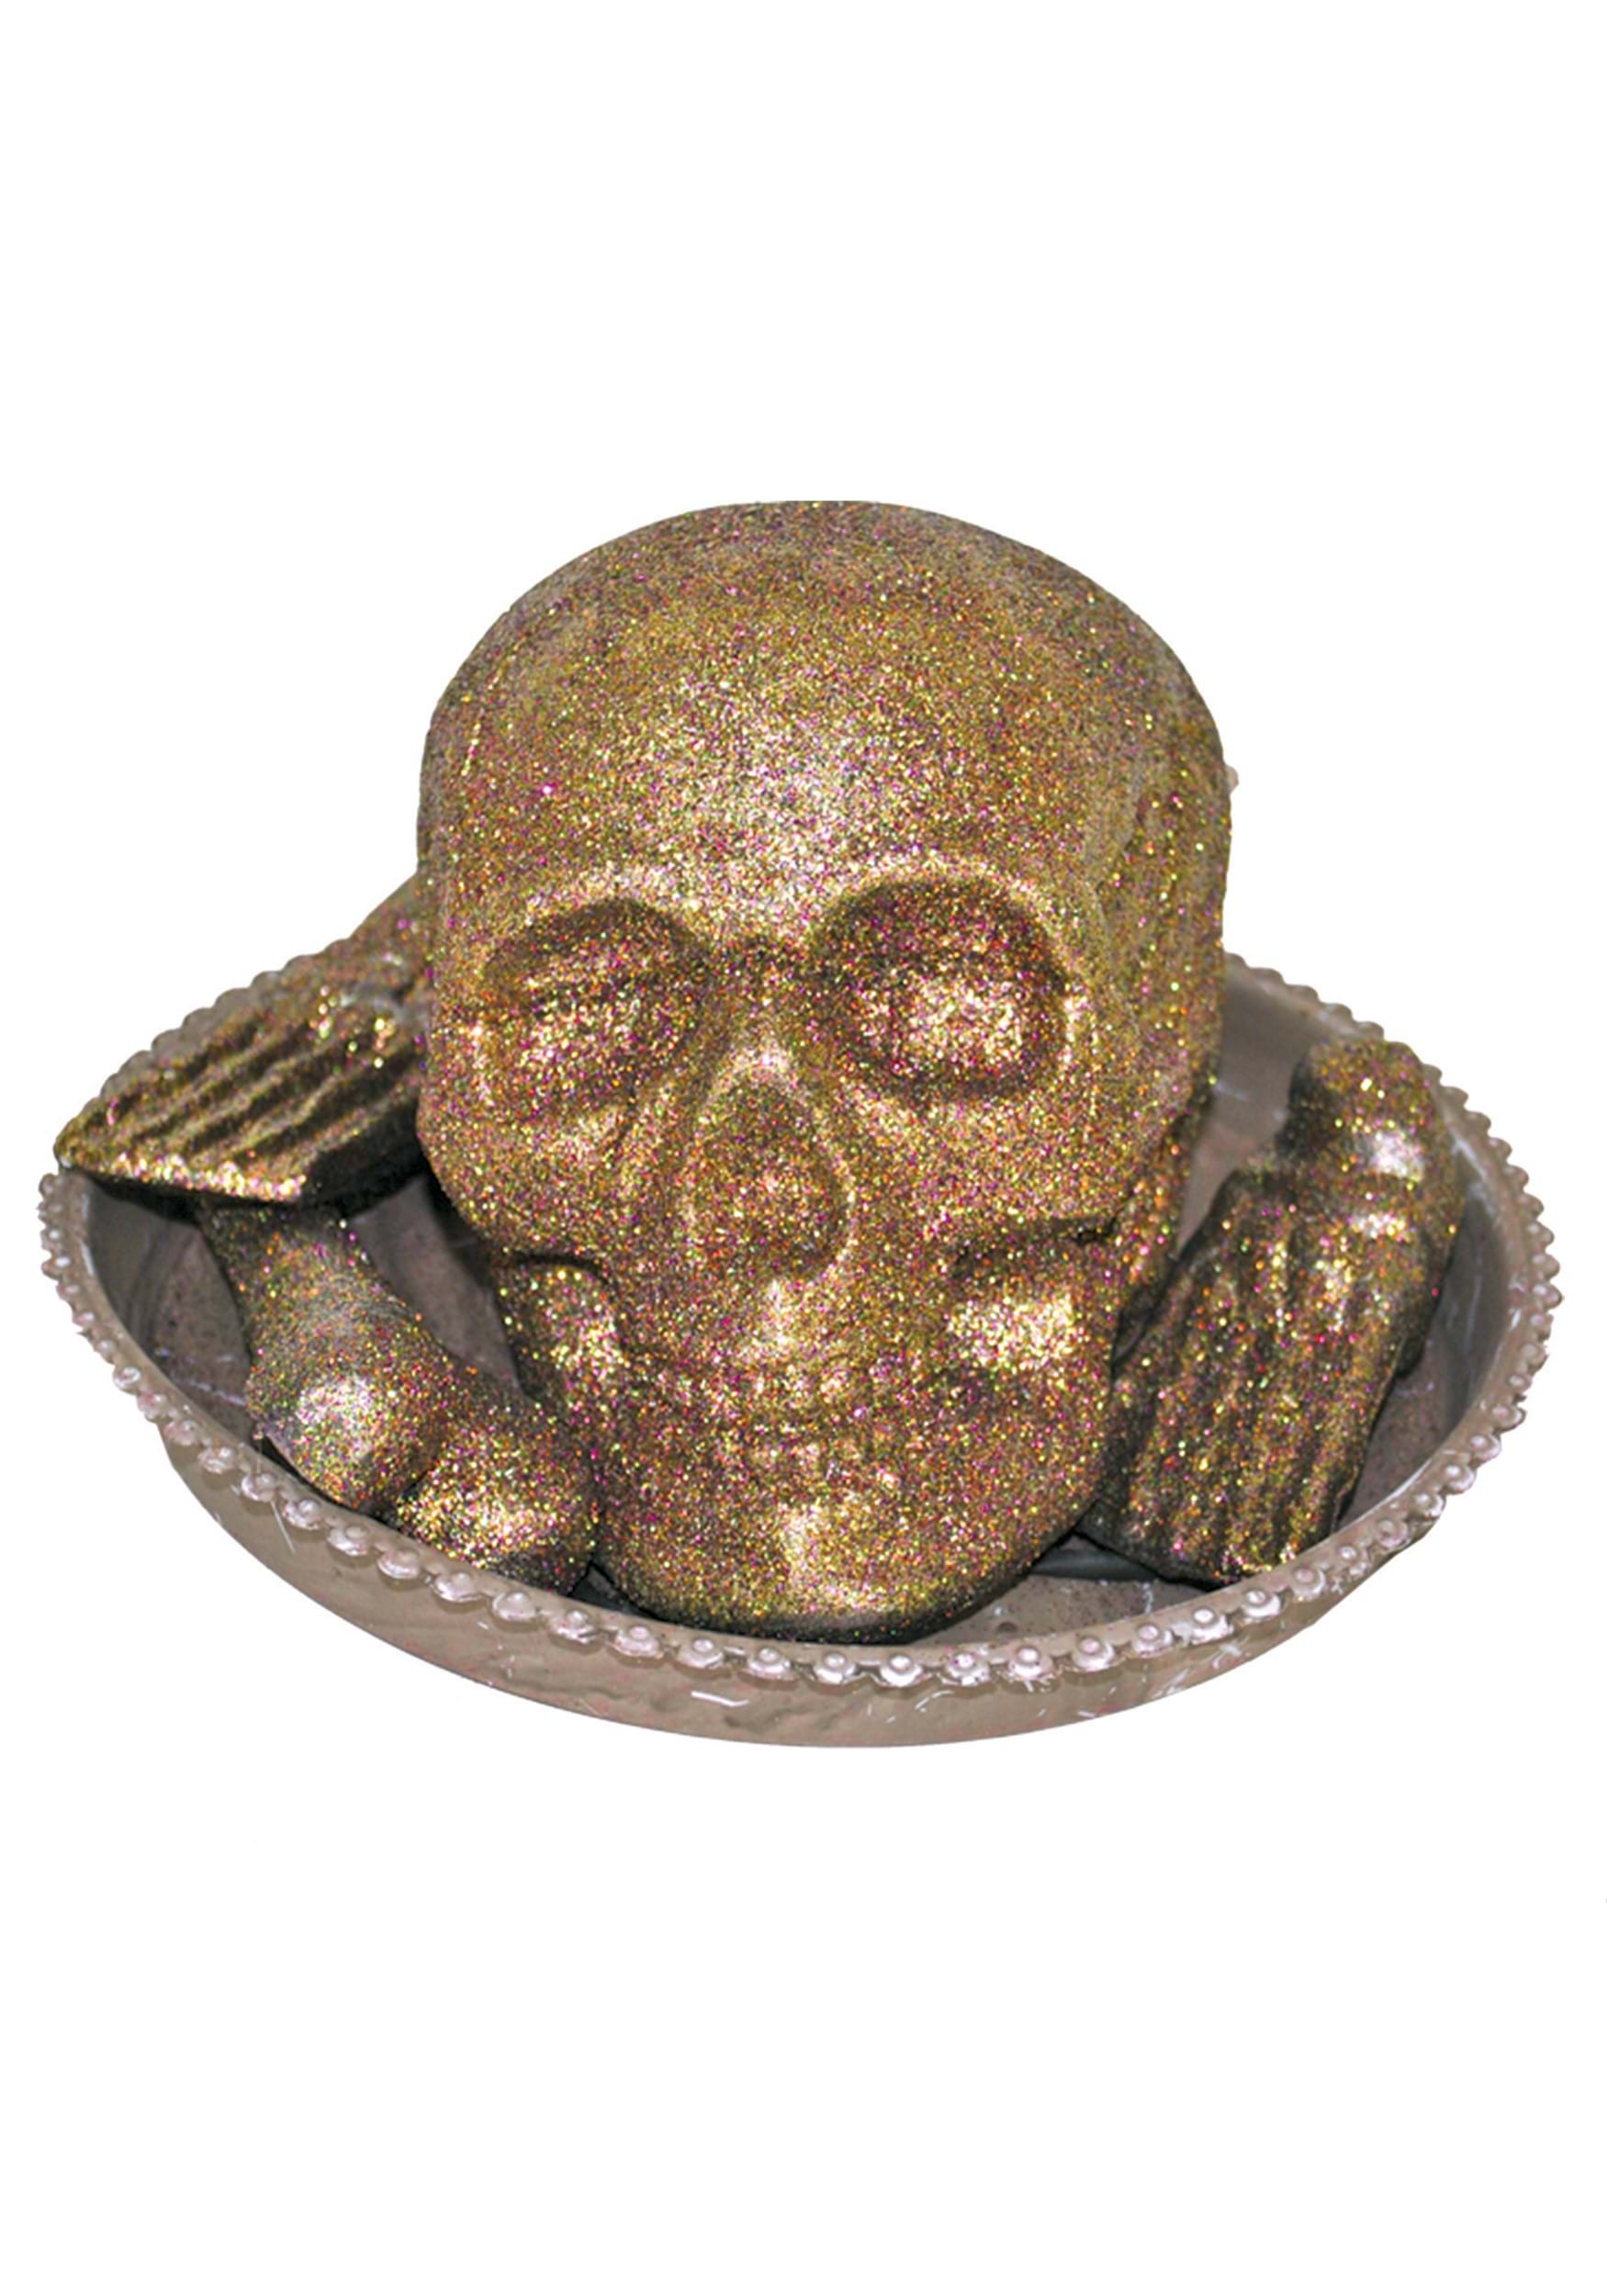 Light Up Gold Glitter Skull and Bones on a Plate Prop